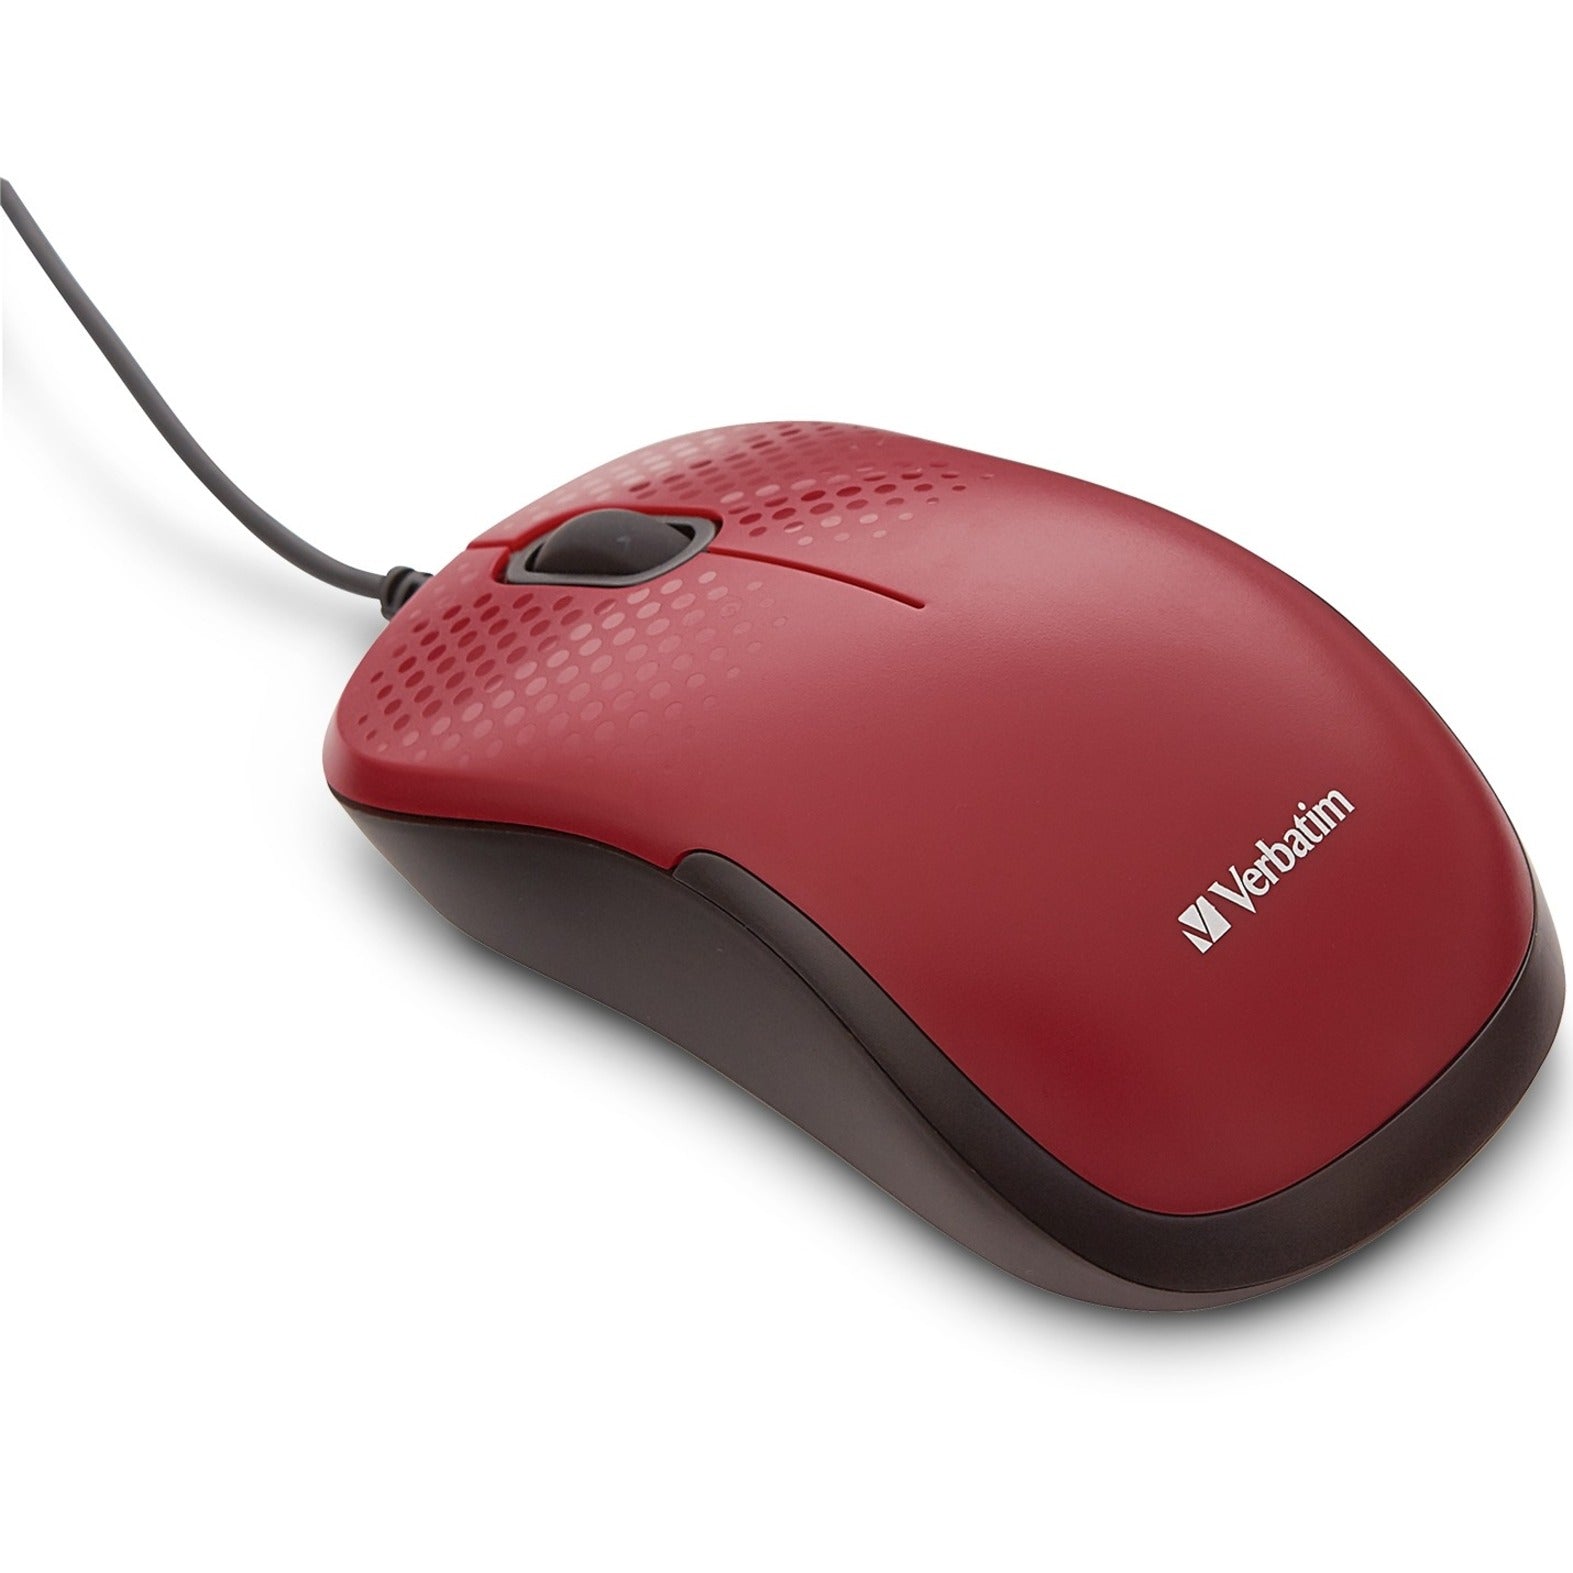 Verbatim 70234 Silent Corded Optical Mouse - Red, 1 Year Warranty, USB Connectivity